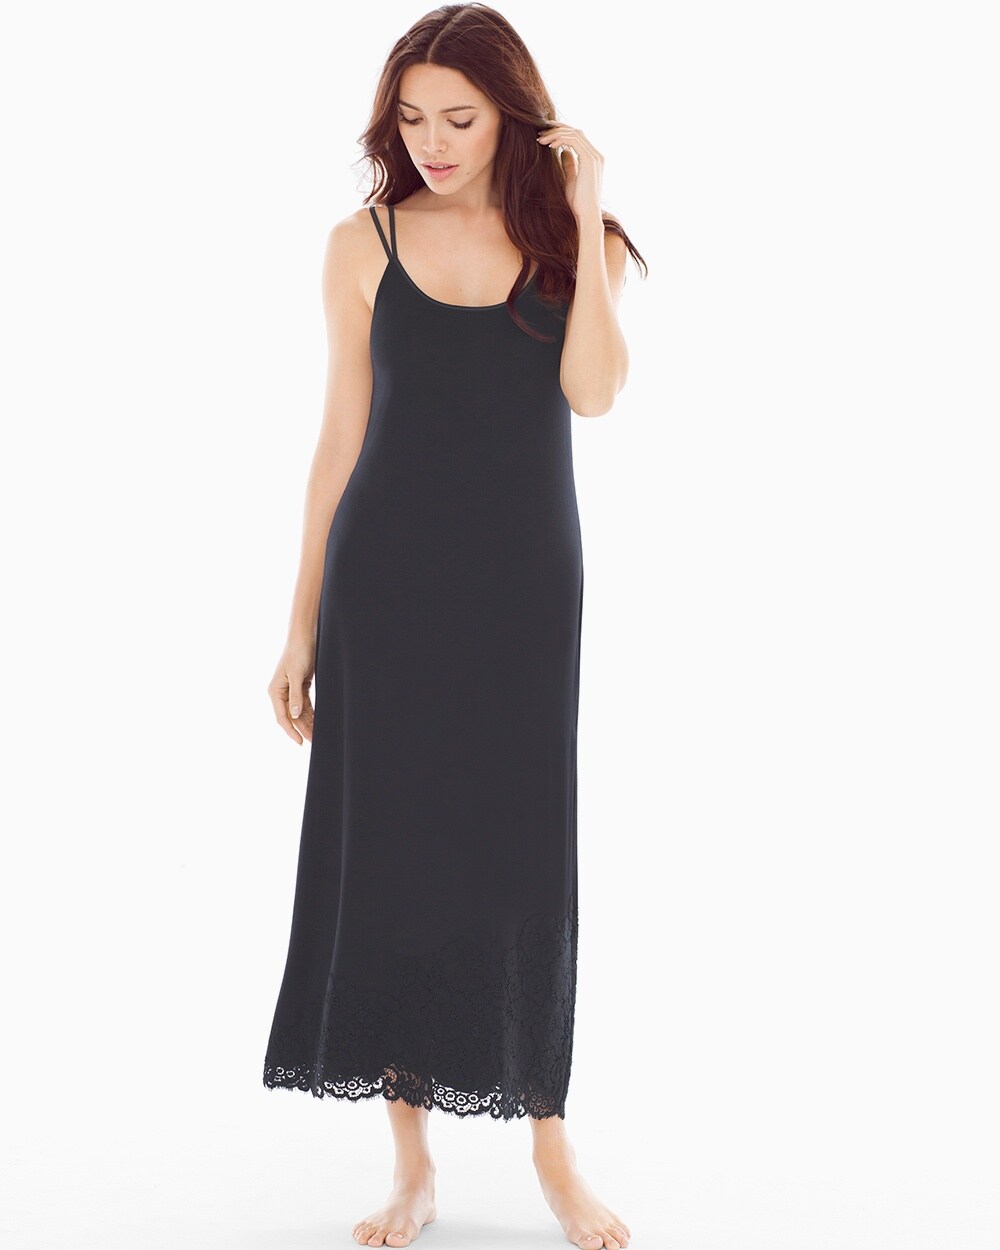 Cool Nights Lace Cutout Tea Length Nightgown Black